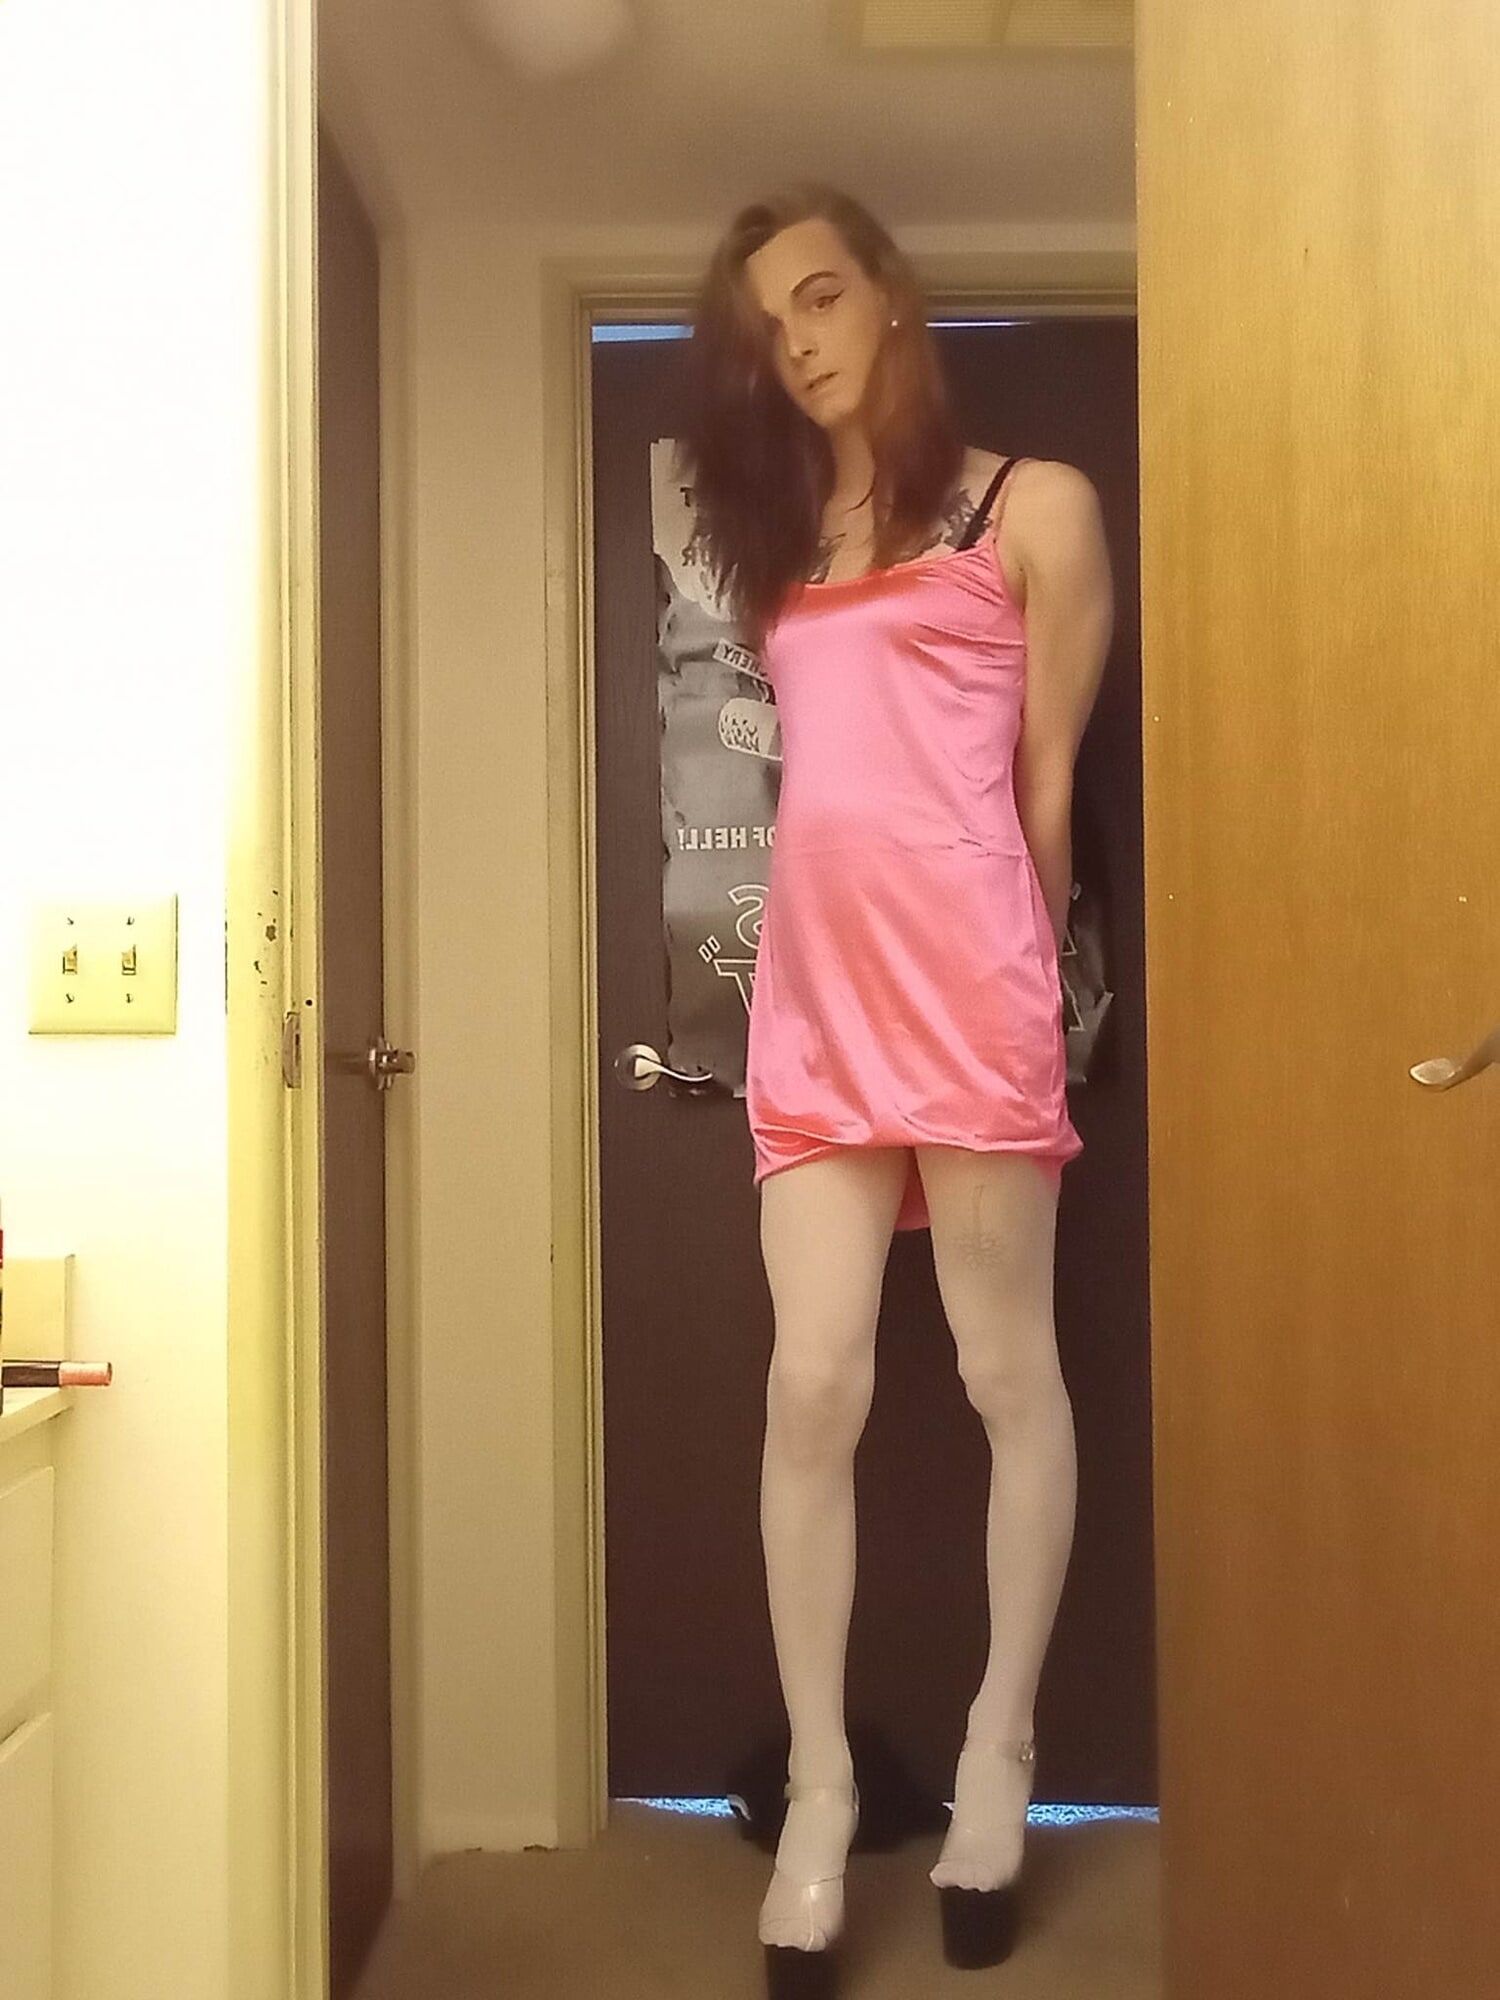 just some cute fuckmeat dressed in pink